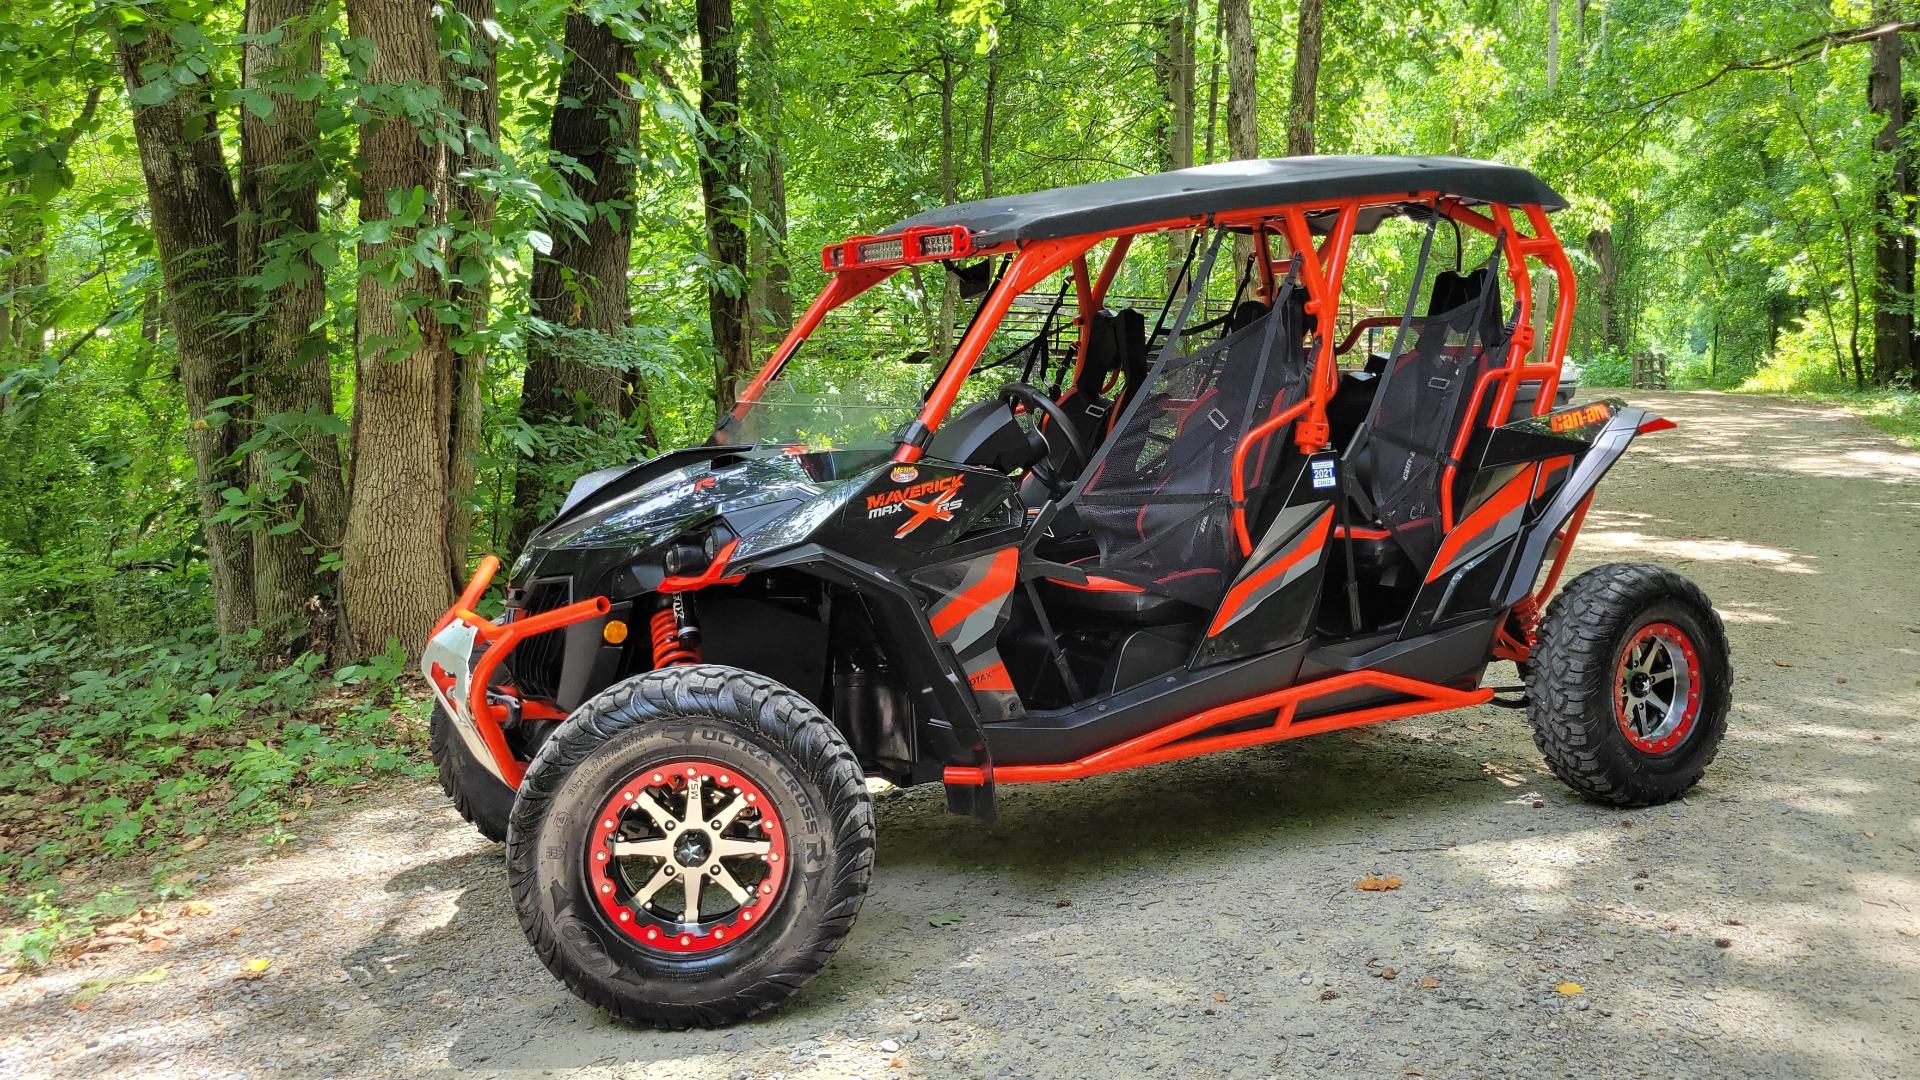 Used 2016 Can-Am MAVERICK MAX X-RS 1000R TURBO / 131HP / 4X4 / 4-SEATER / CUSTOM SOUND SYSTEM for sale $25,995 at Formula Imports in Charlotte NC 28227 60